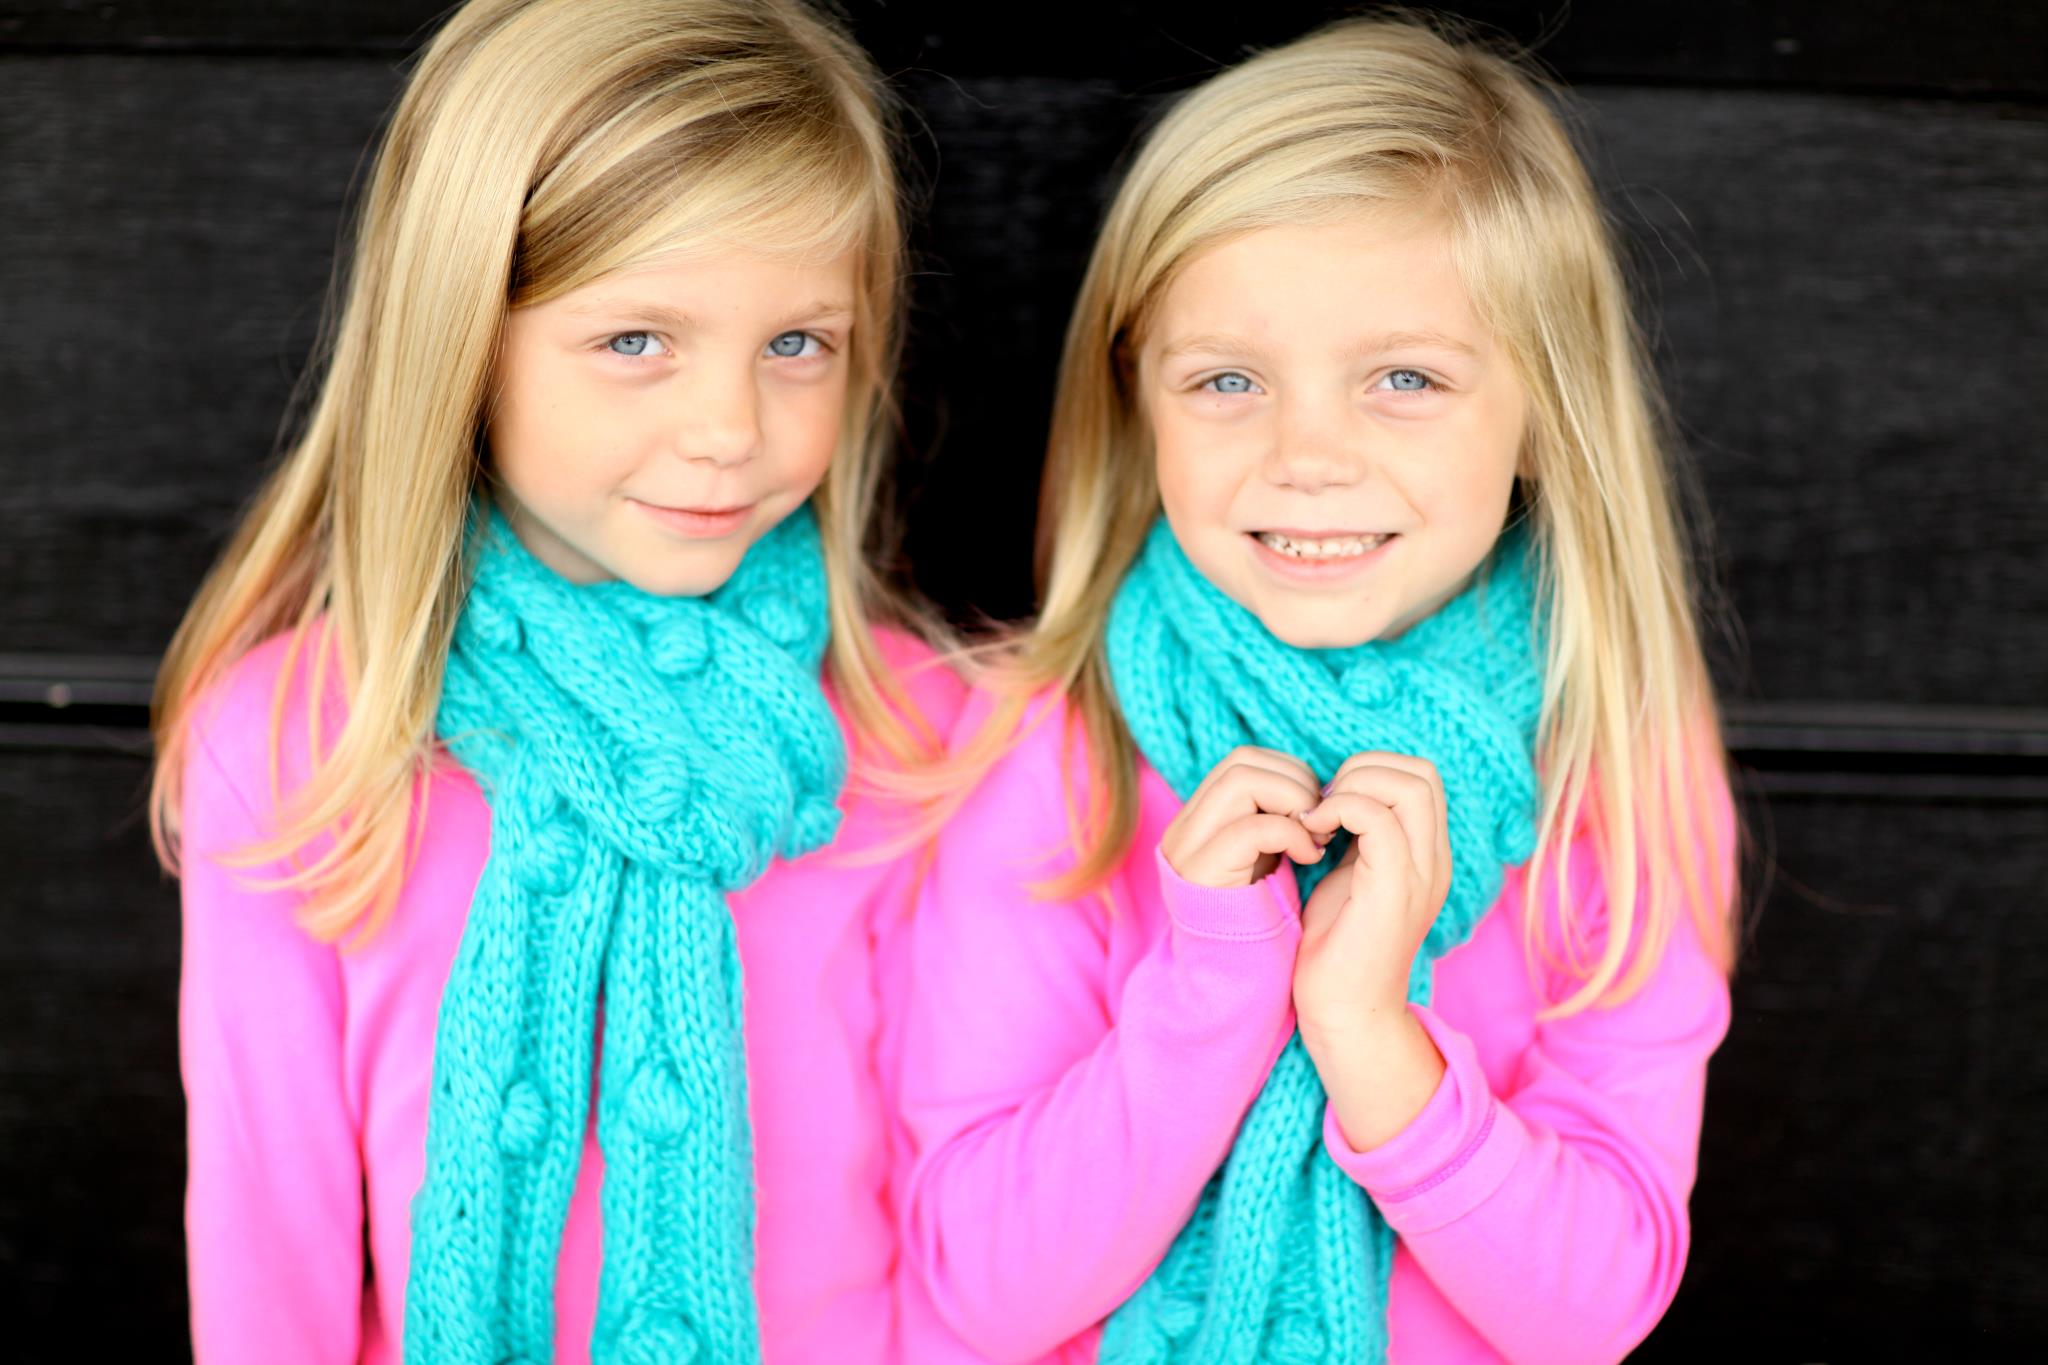 Carsen and identical twin sister, Camden Flowers.